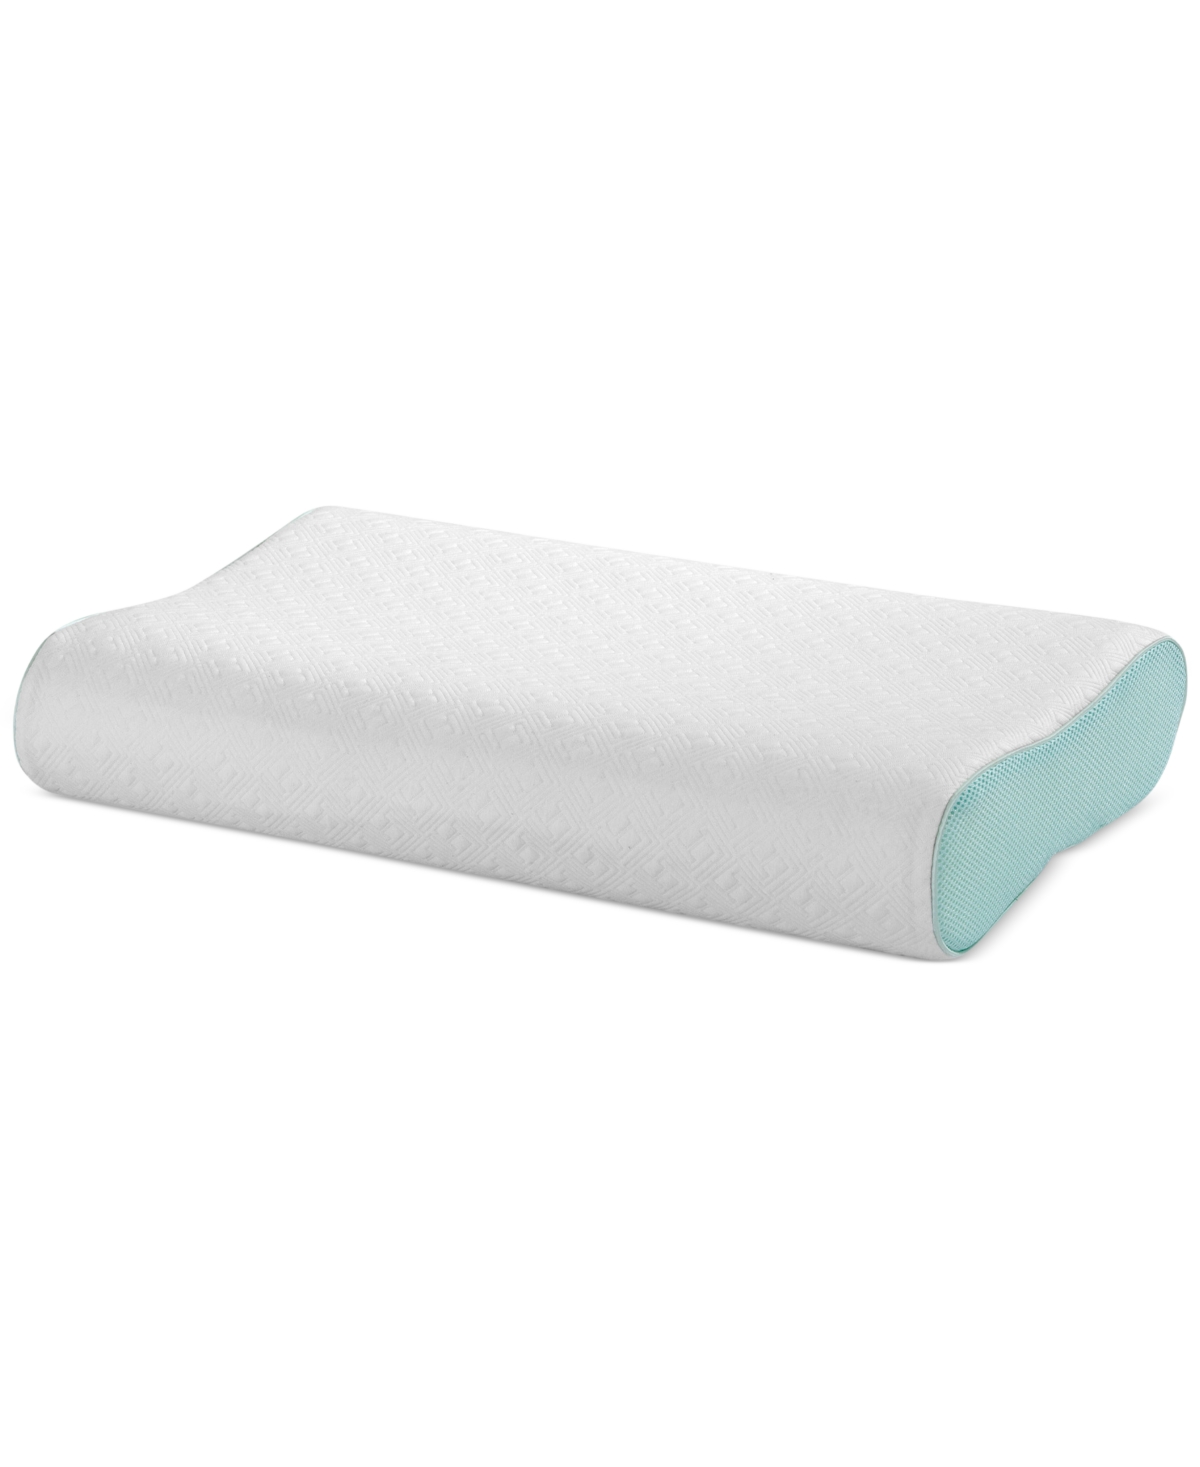 Intellisleep Natural Comfort Contour Memory Foam Pillow, Standard, Created For Macy's In White With Green Mesh Gusset